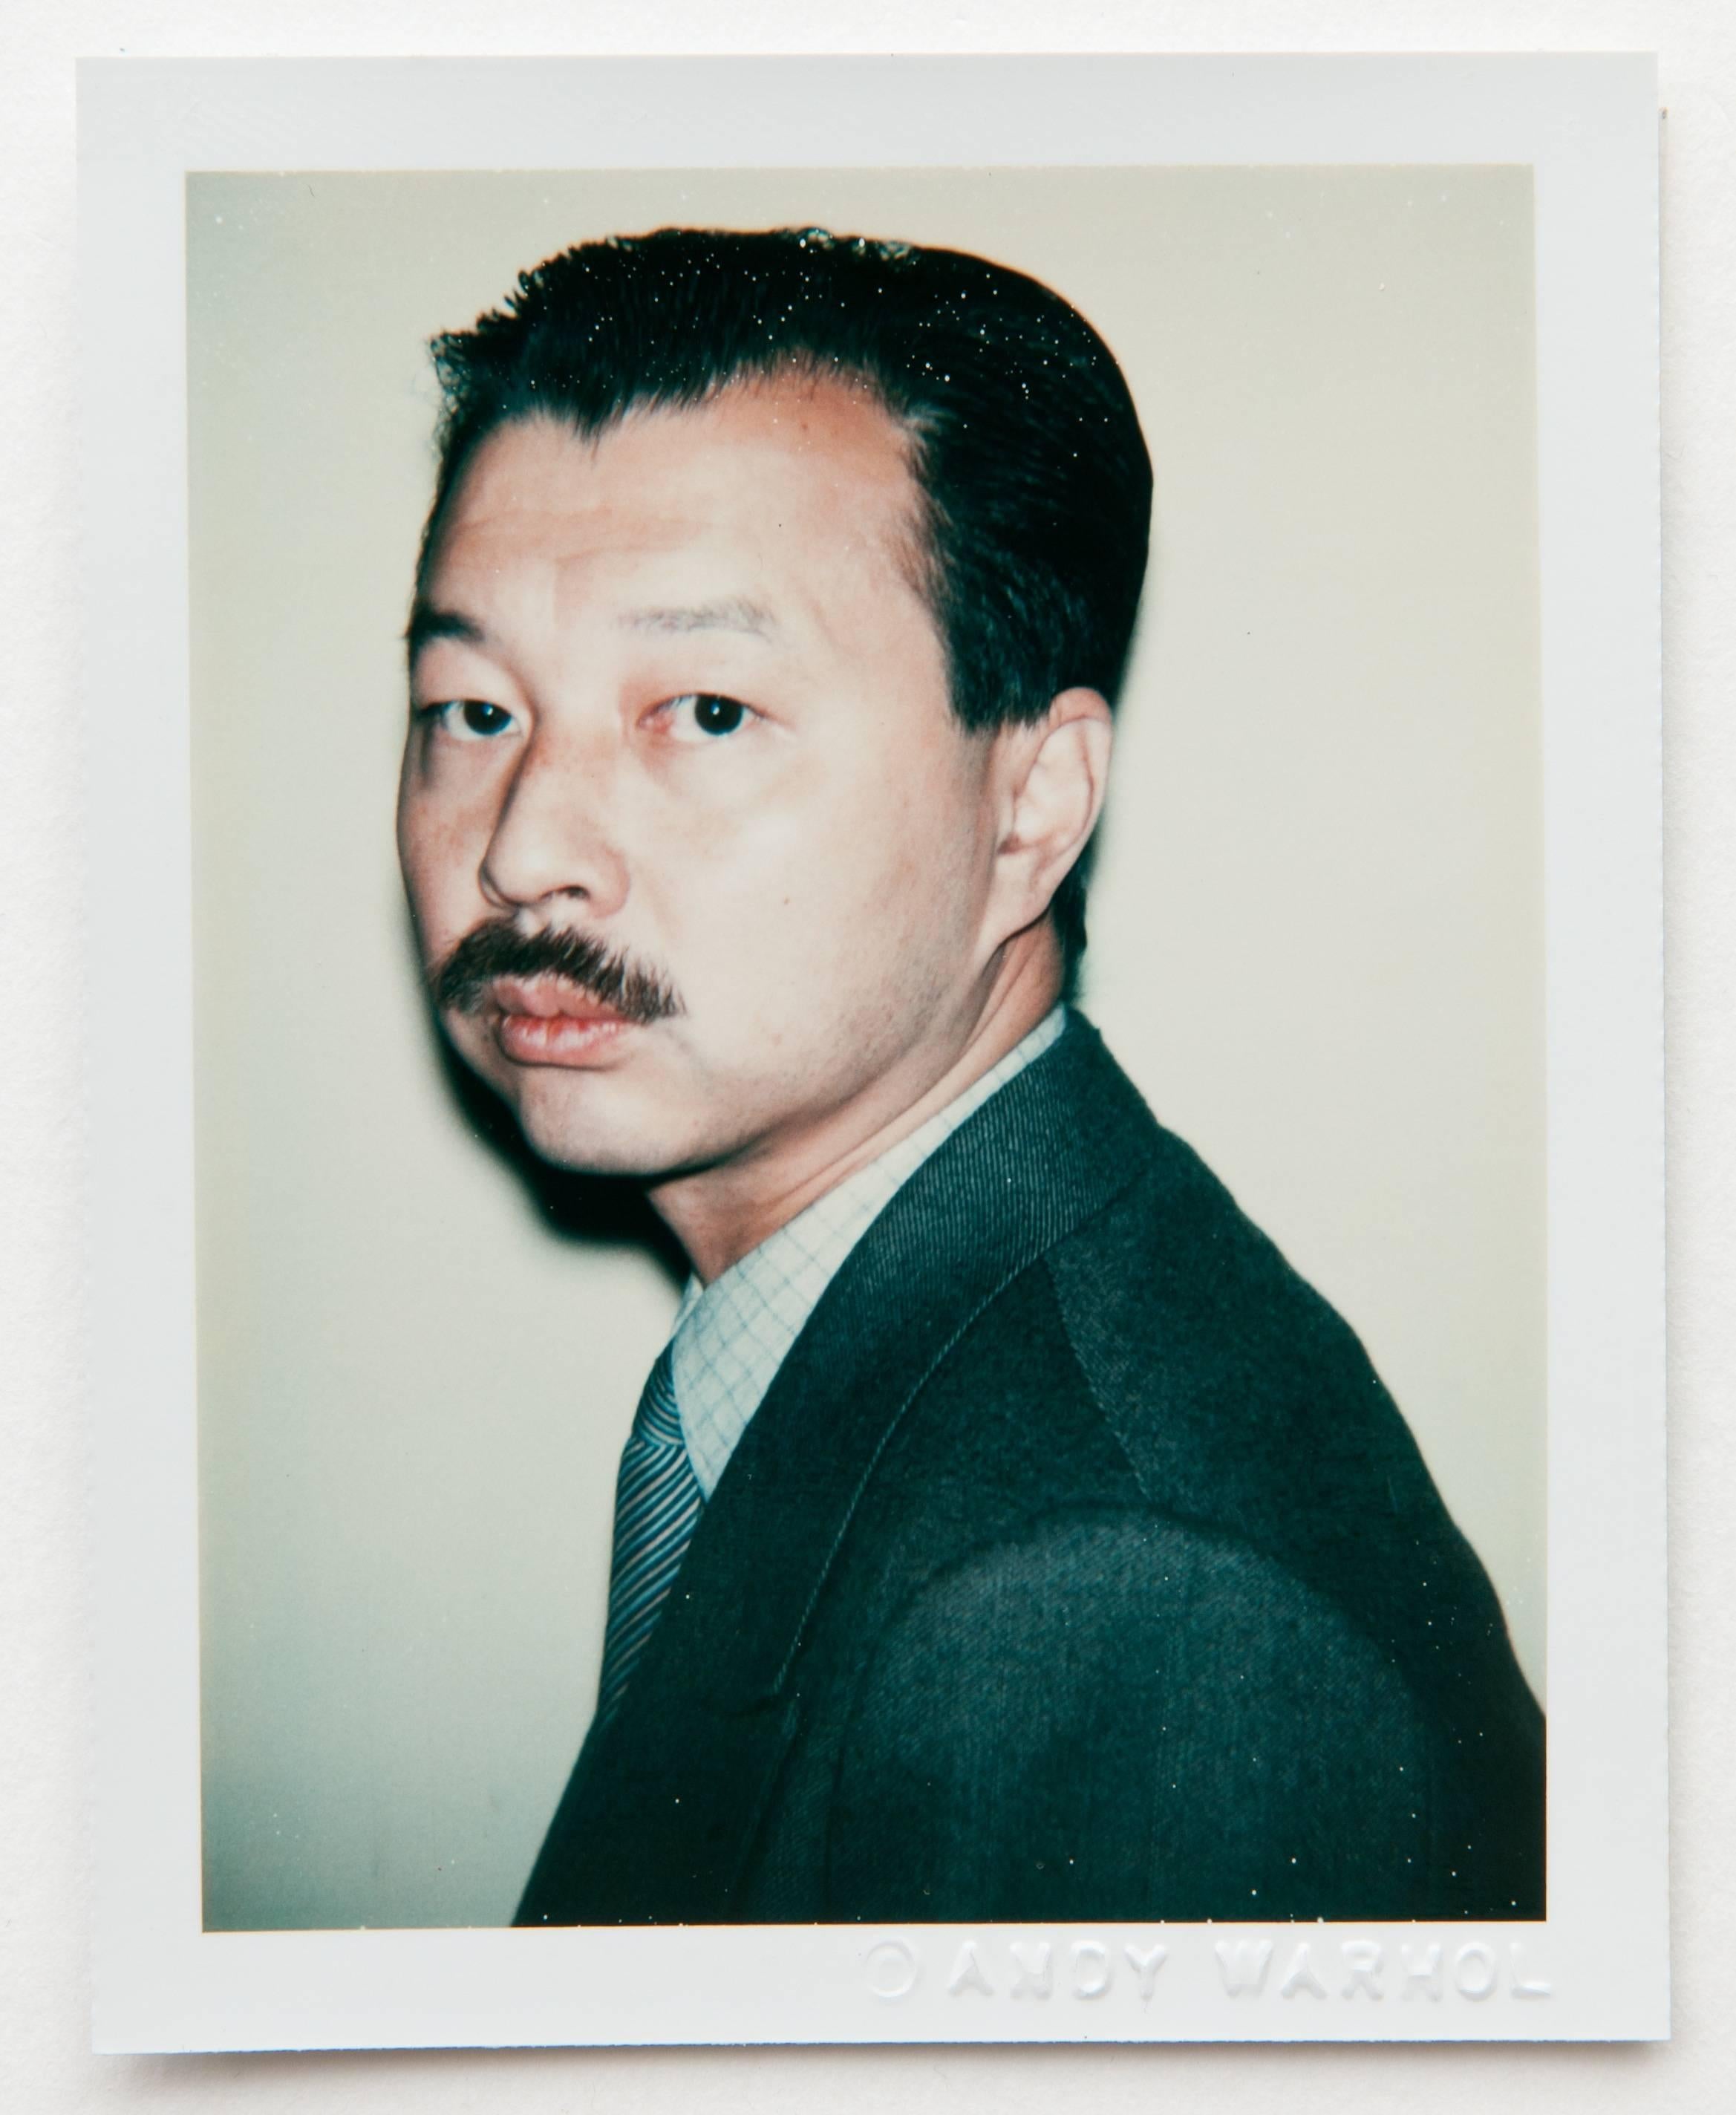 Michael Chow is a restauranteur and the owner of the Mr. Chow restaurant chain. 

Image dimensions: 4.25 x 3.375 in.
Framed dimensions: 11 x 10.5 in.

Work is framed to archival standards by Handmade Frames of Brooklyn, New York. Stamped on verso by